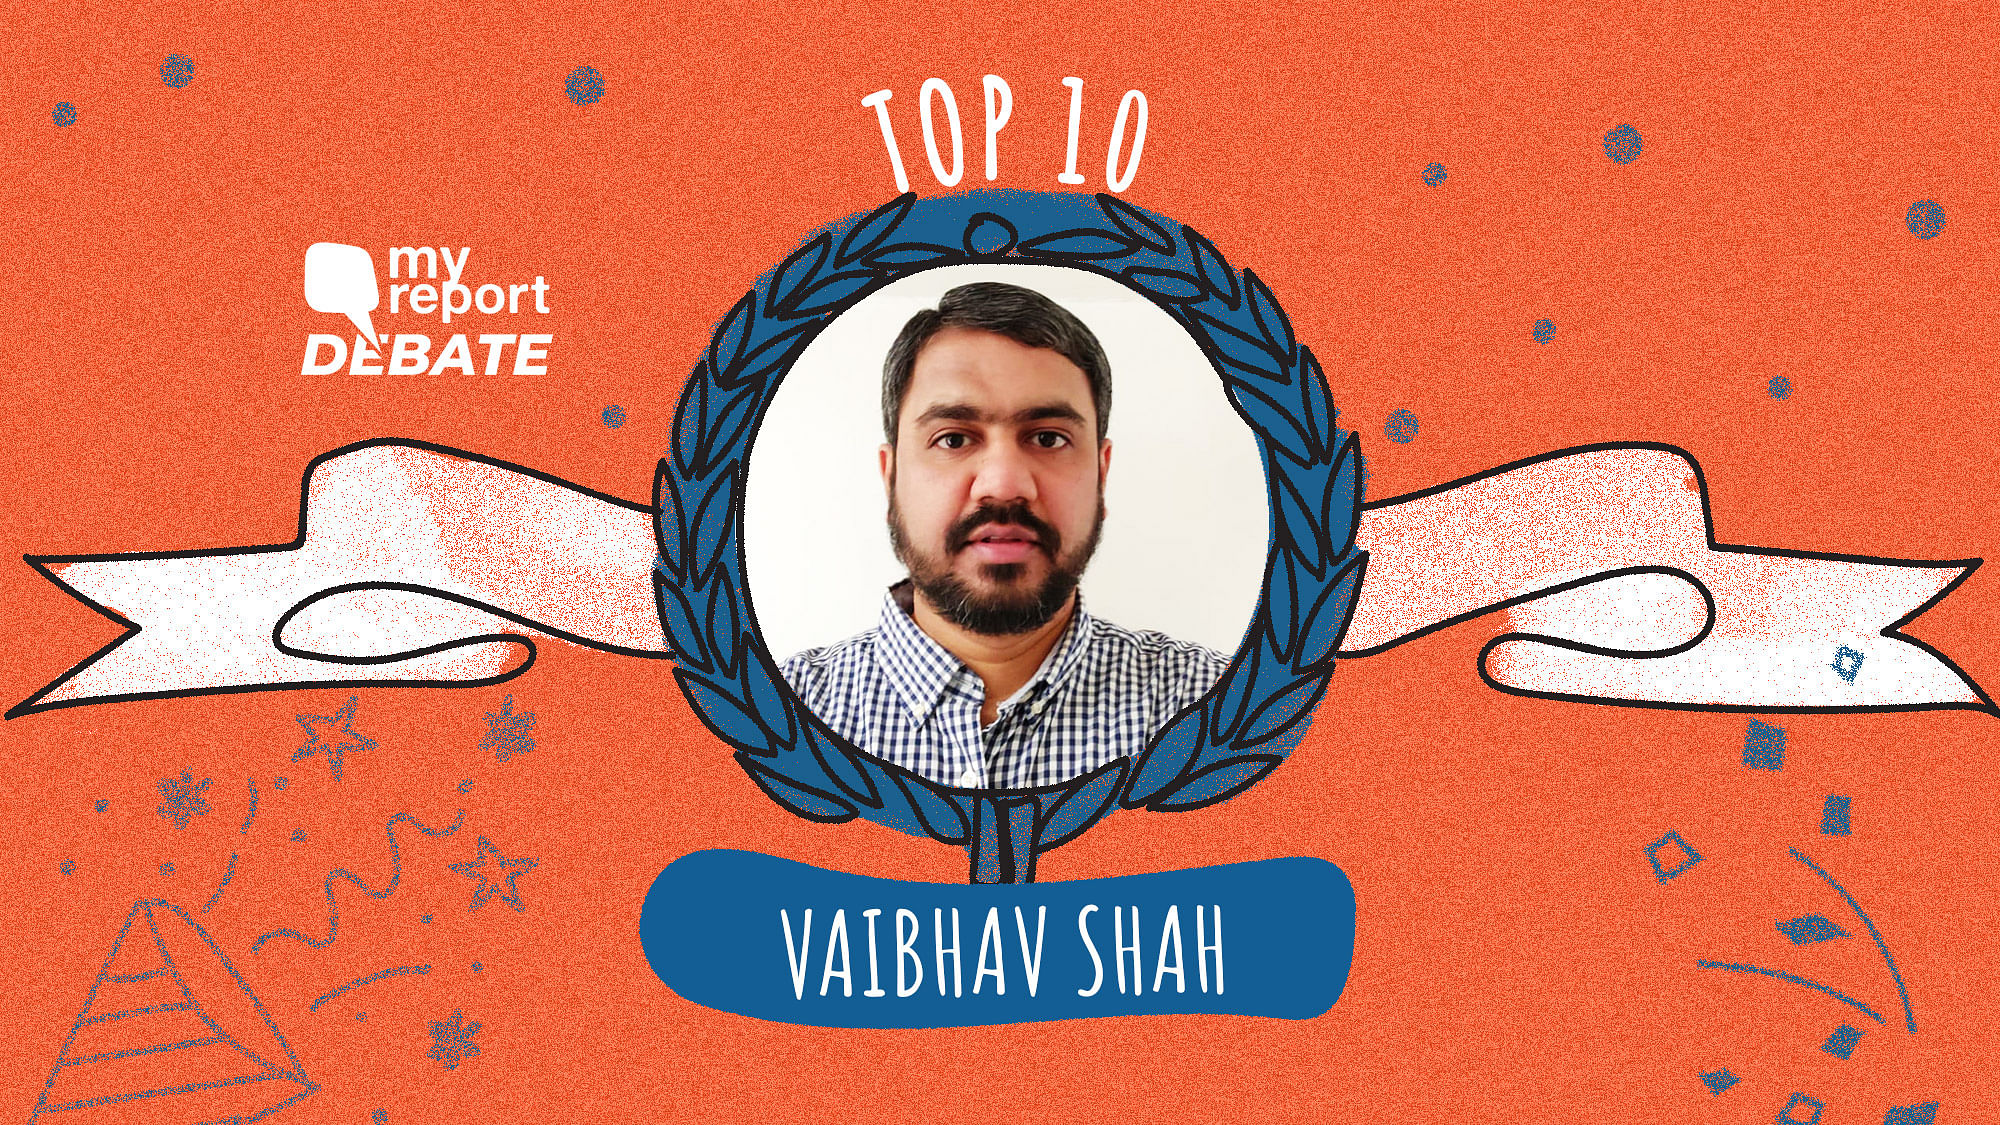 Vaibhav Shah’s essay is among the Top 10 of the My Report Debate II.